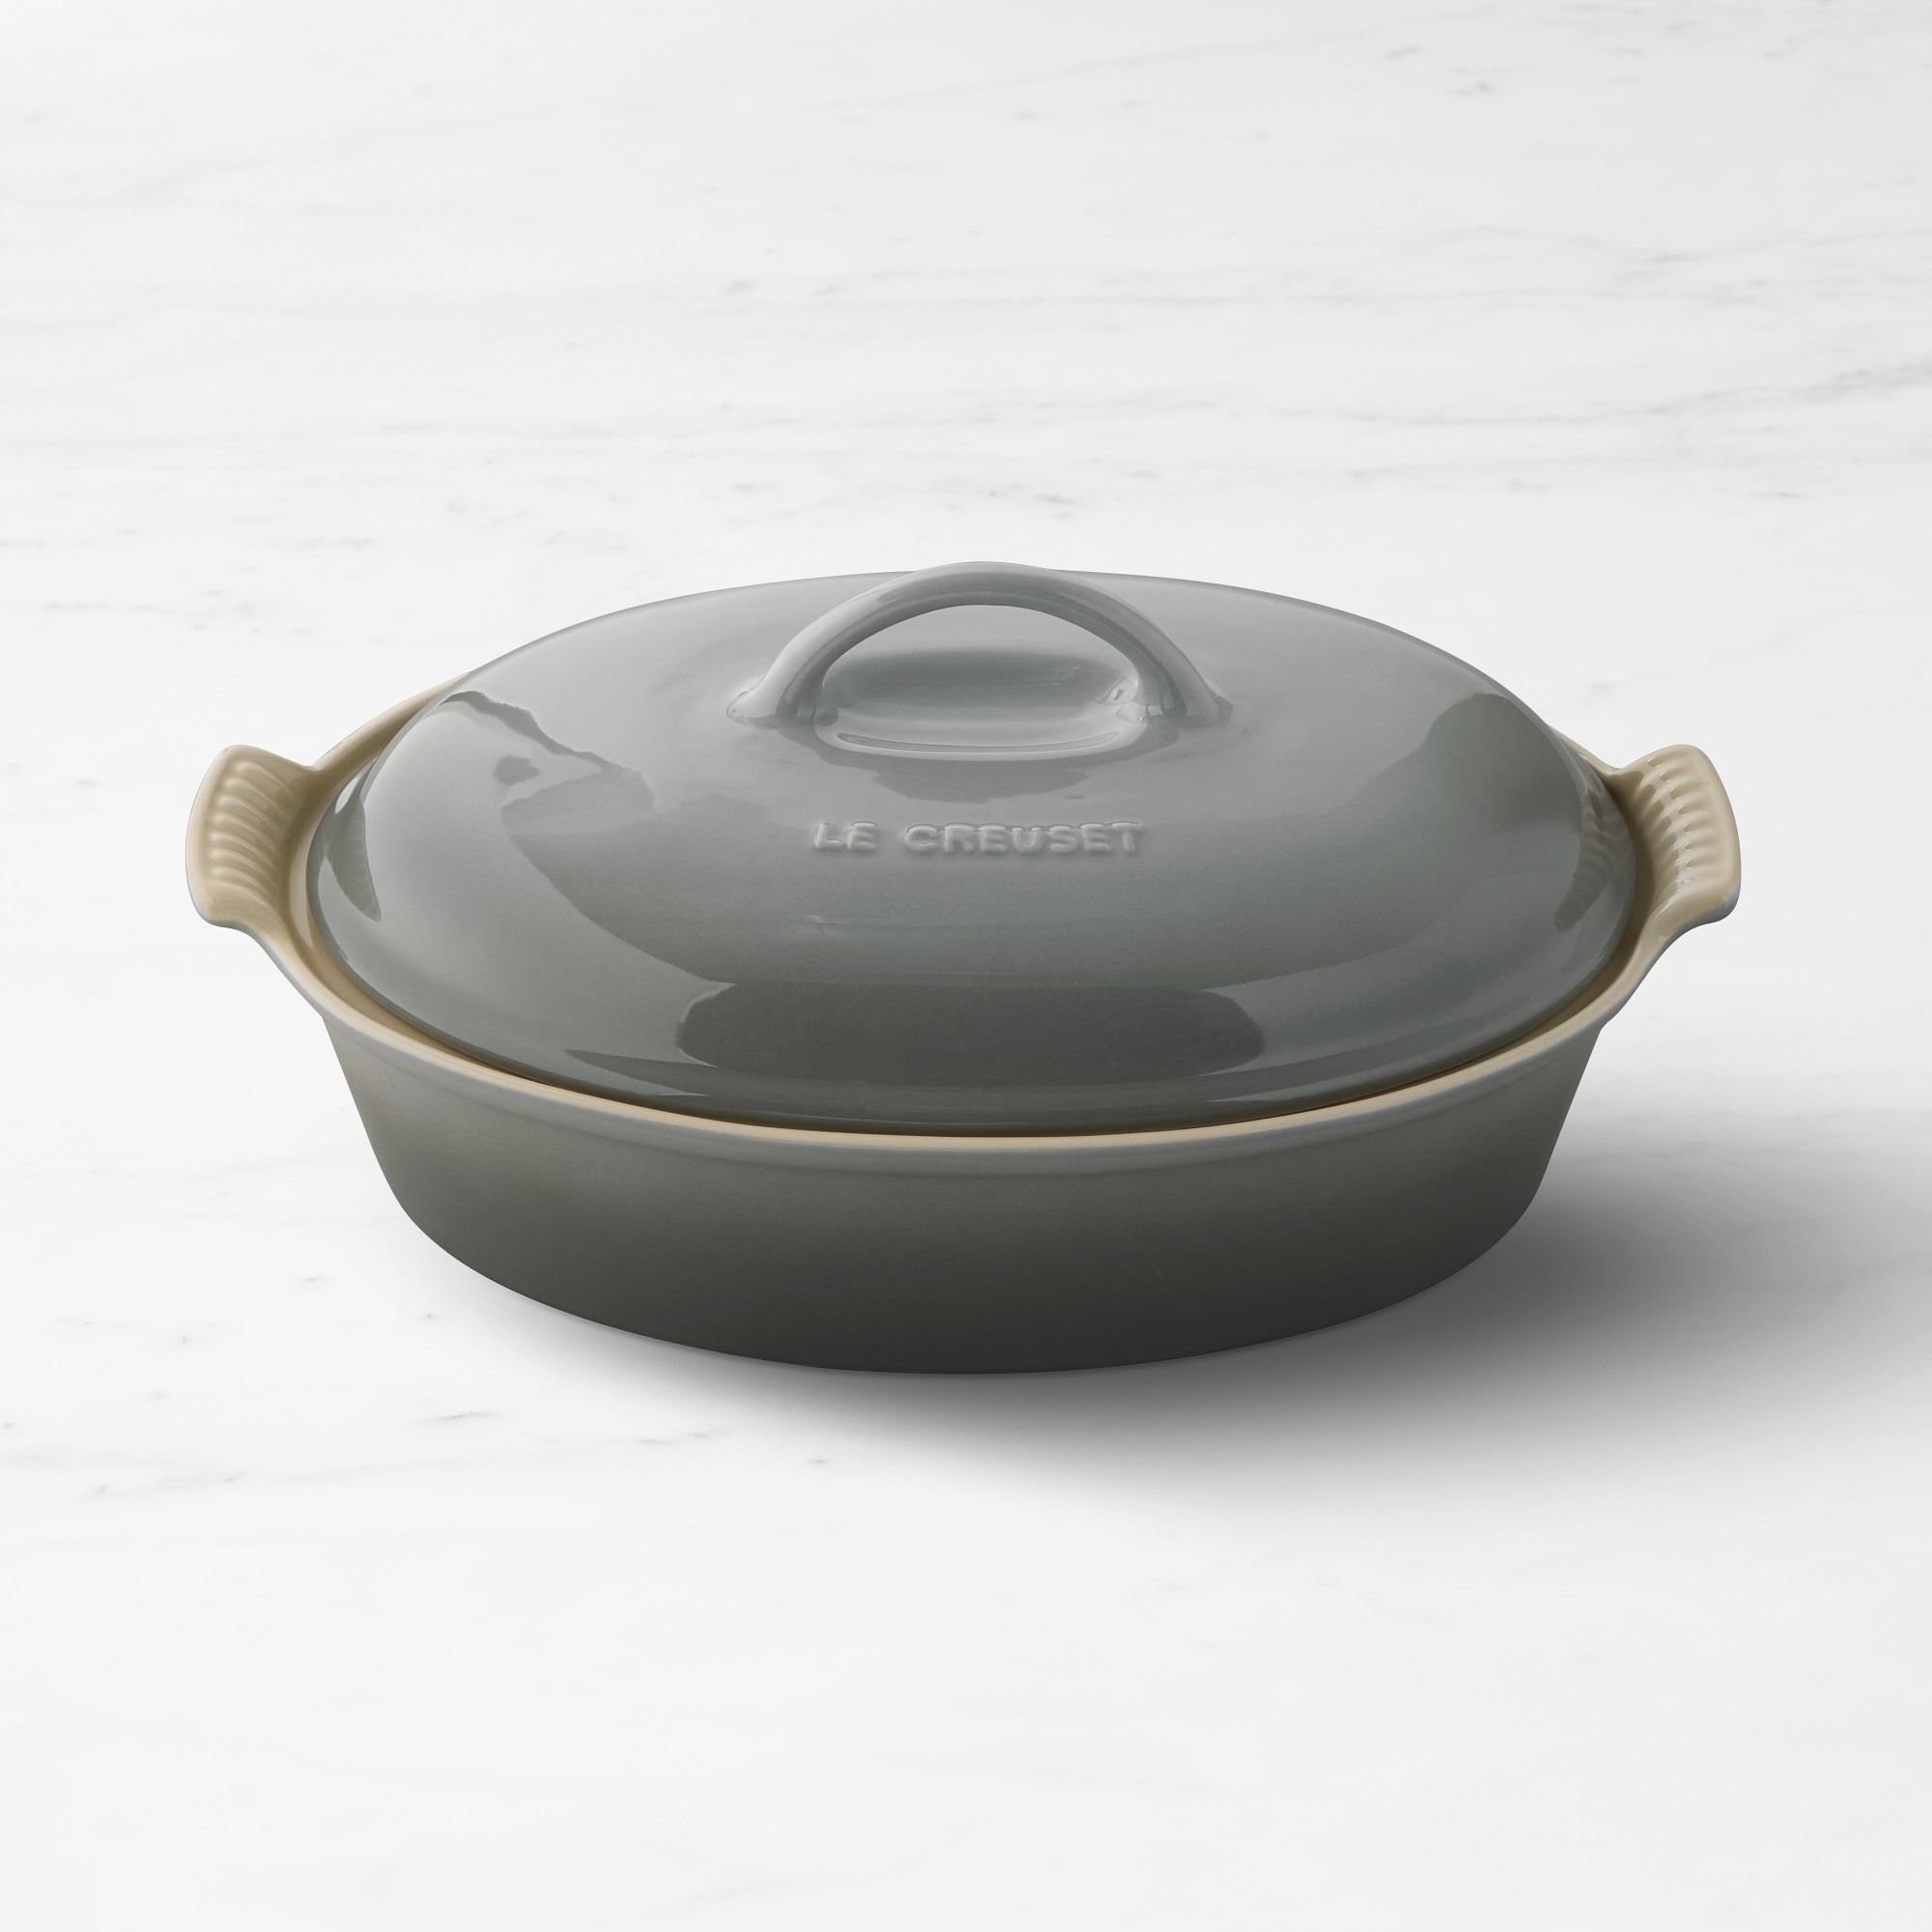 Le Creuset Heritage Stoneware Oval Covered Casserole, 4-Qt.